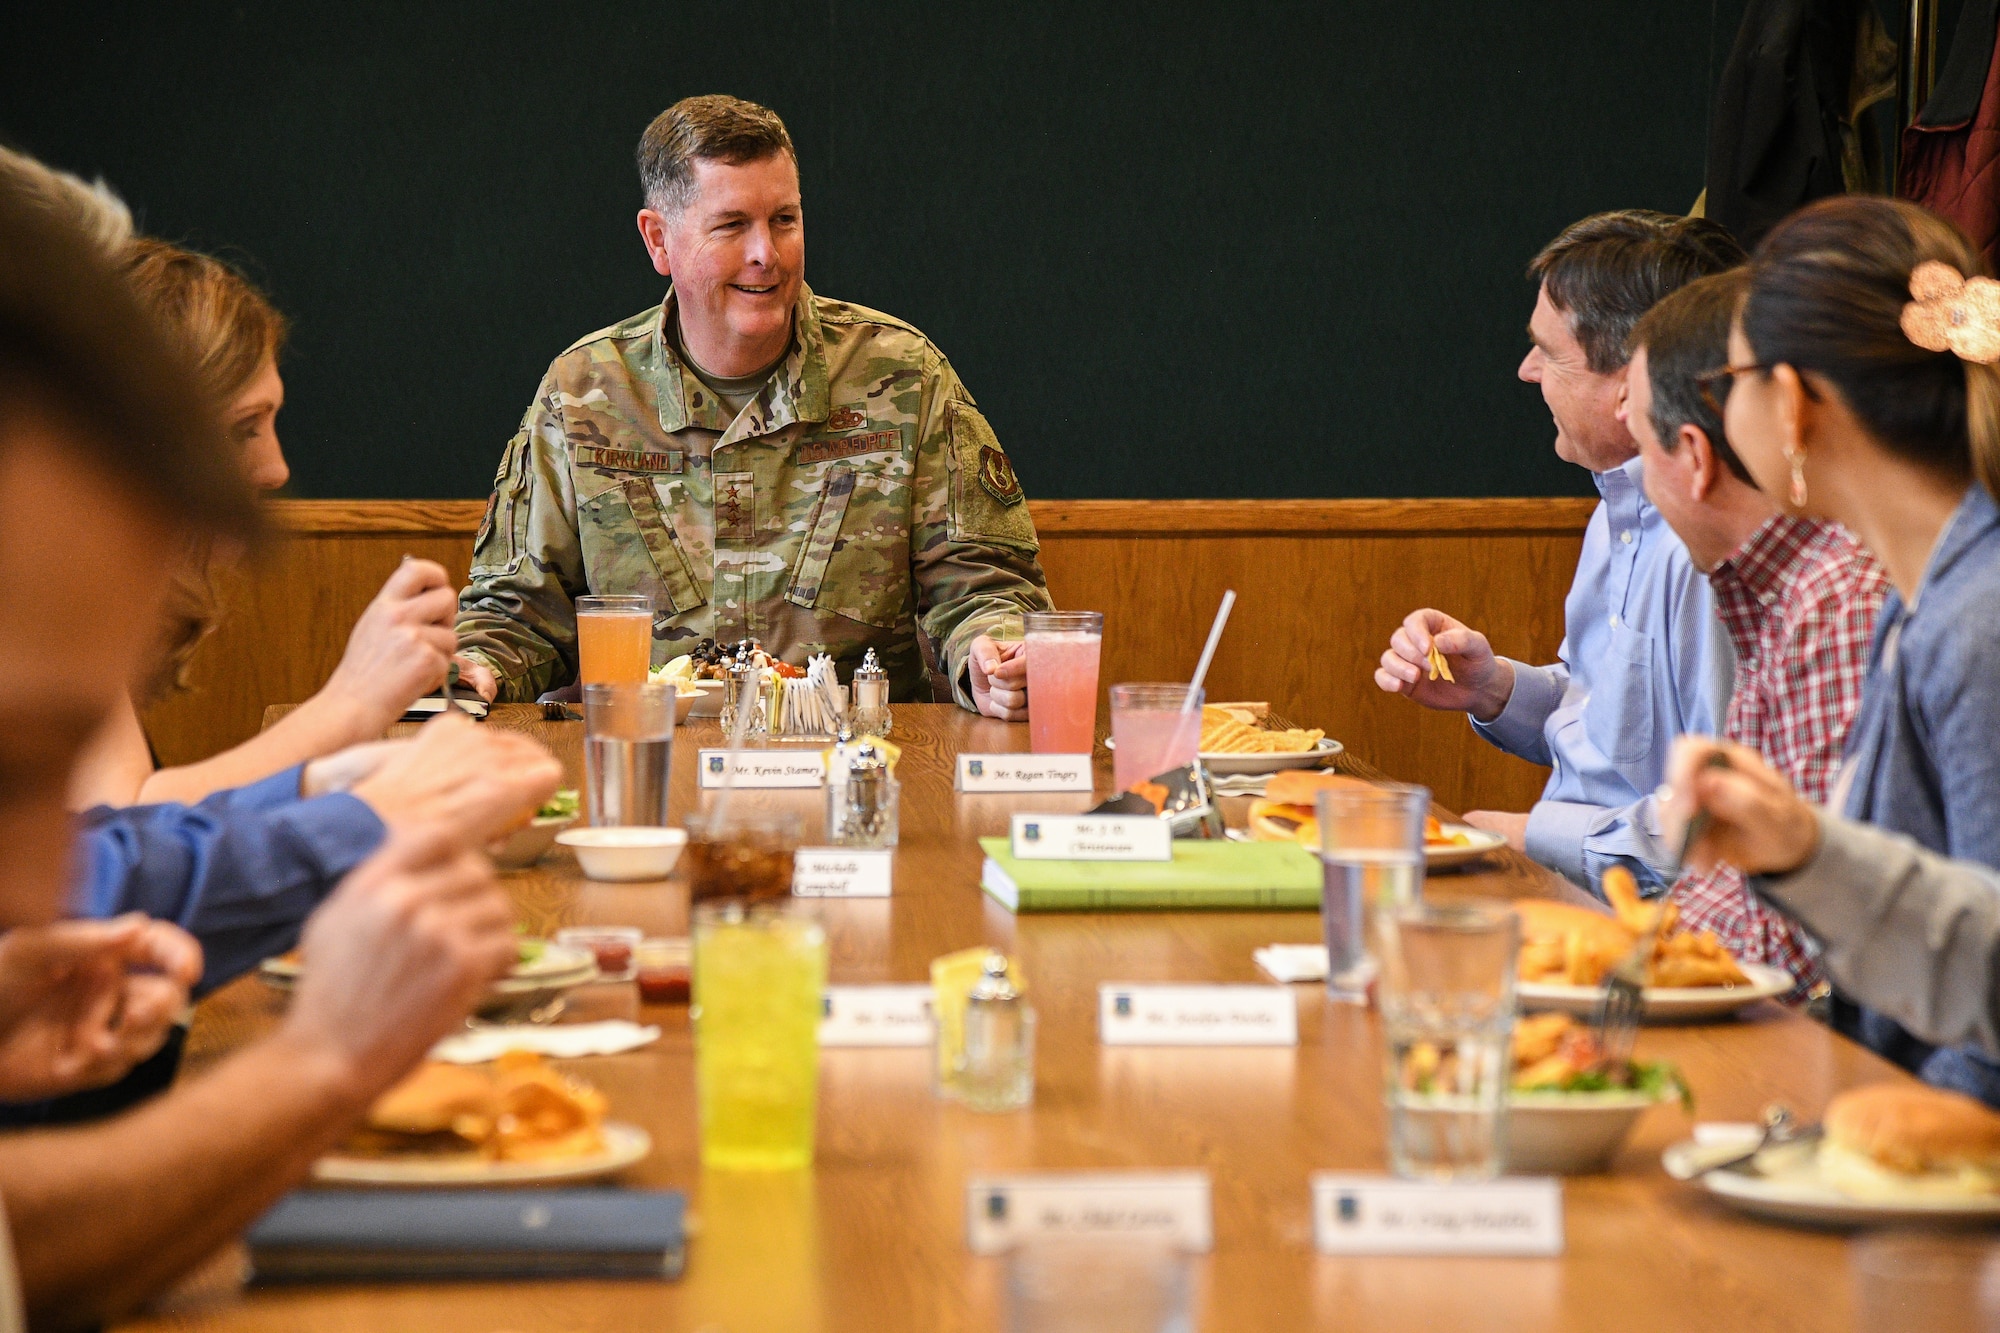 Lt. Gen. Gene Kirkland interacts with several squadron-level leaders gathered at a table eating lunch.